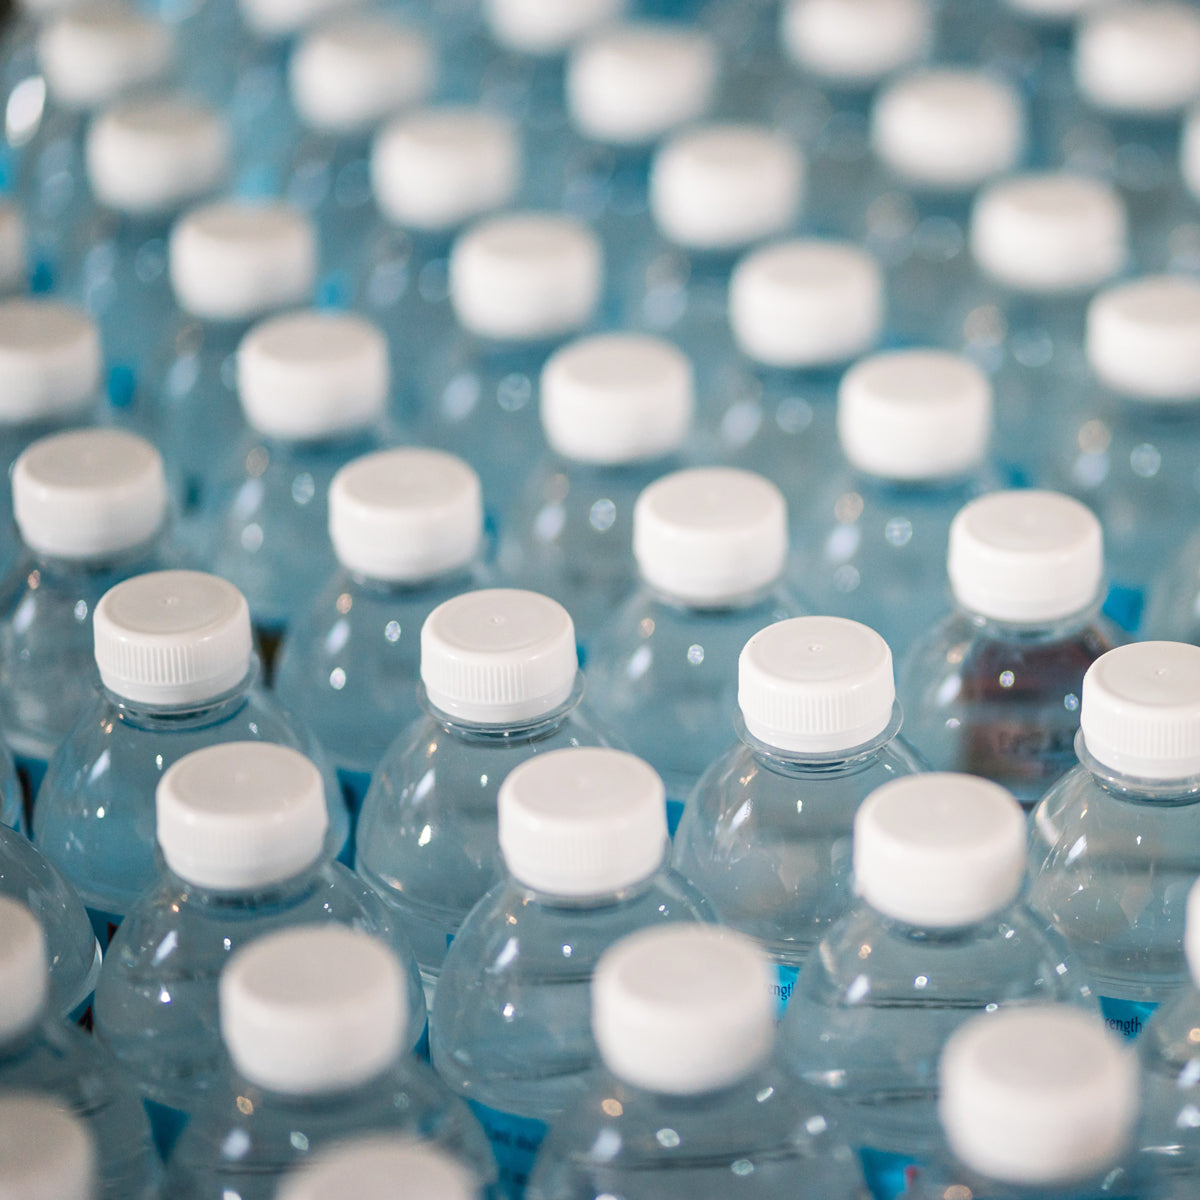 Rows of bottled water.